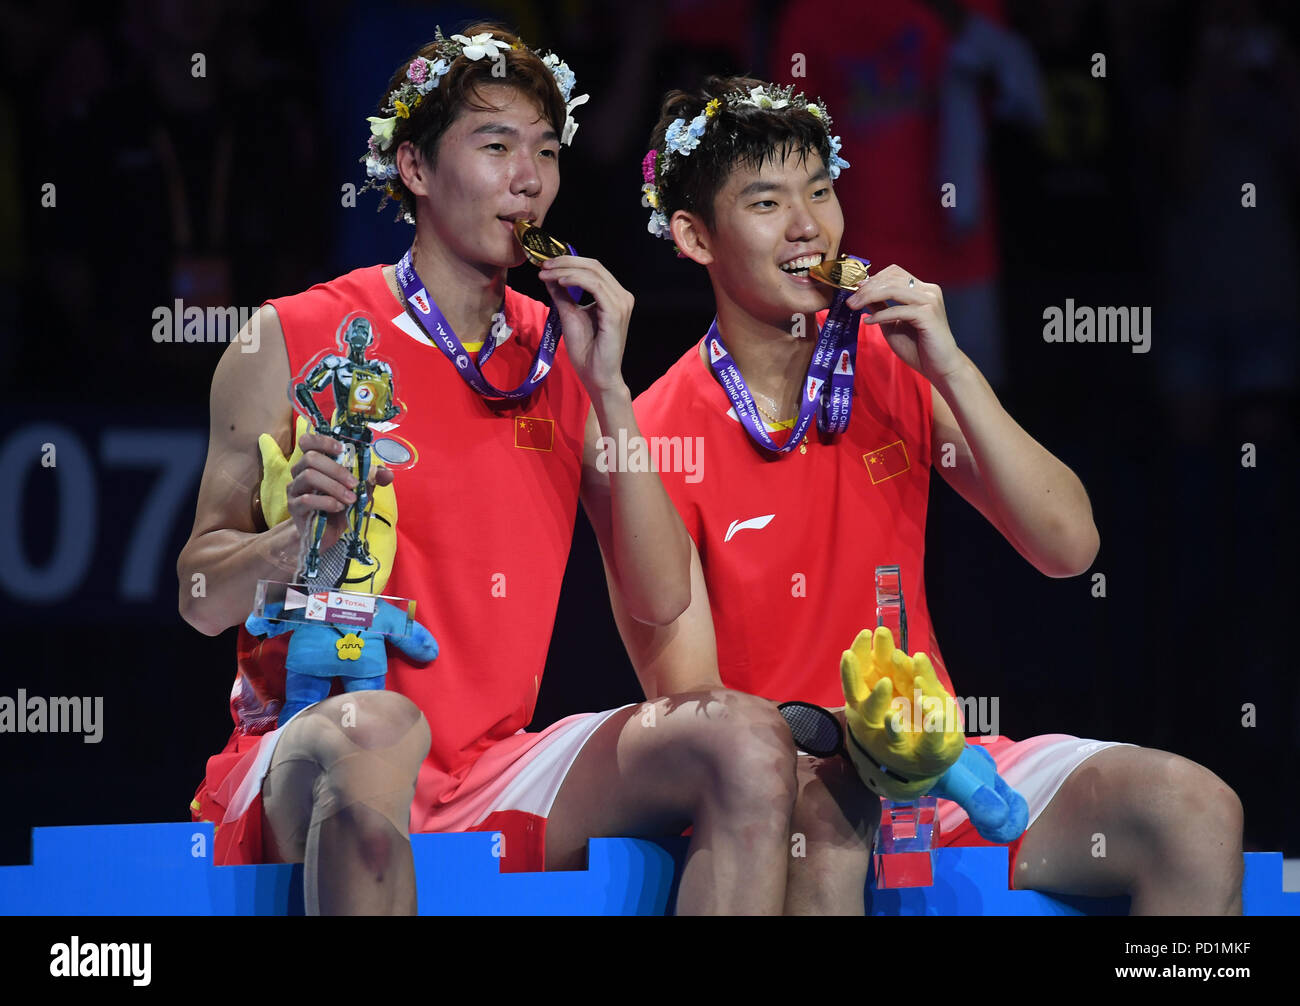 Levere deform Alt det bedste Nanjing, China's Jiangsu Province. 5th Aug, 2018. Li Junhui (L) and Liu  Yuchen of China shows their gold medals during the awarding ceremony for  the men's doubles final at the BWF (Badminton